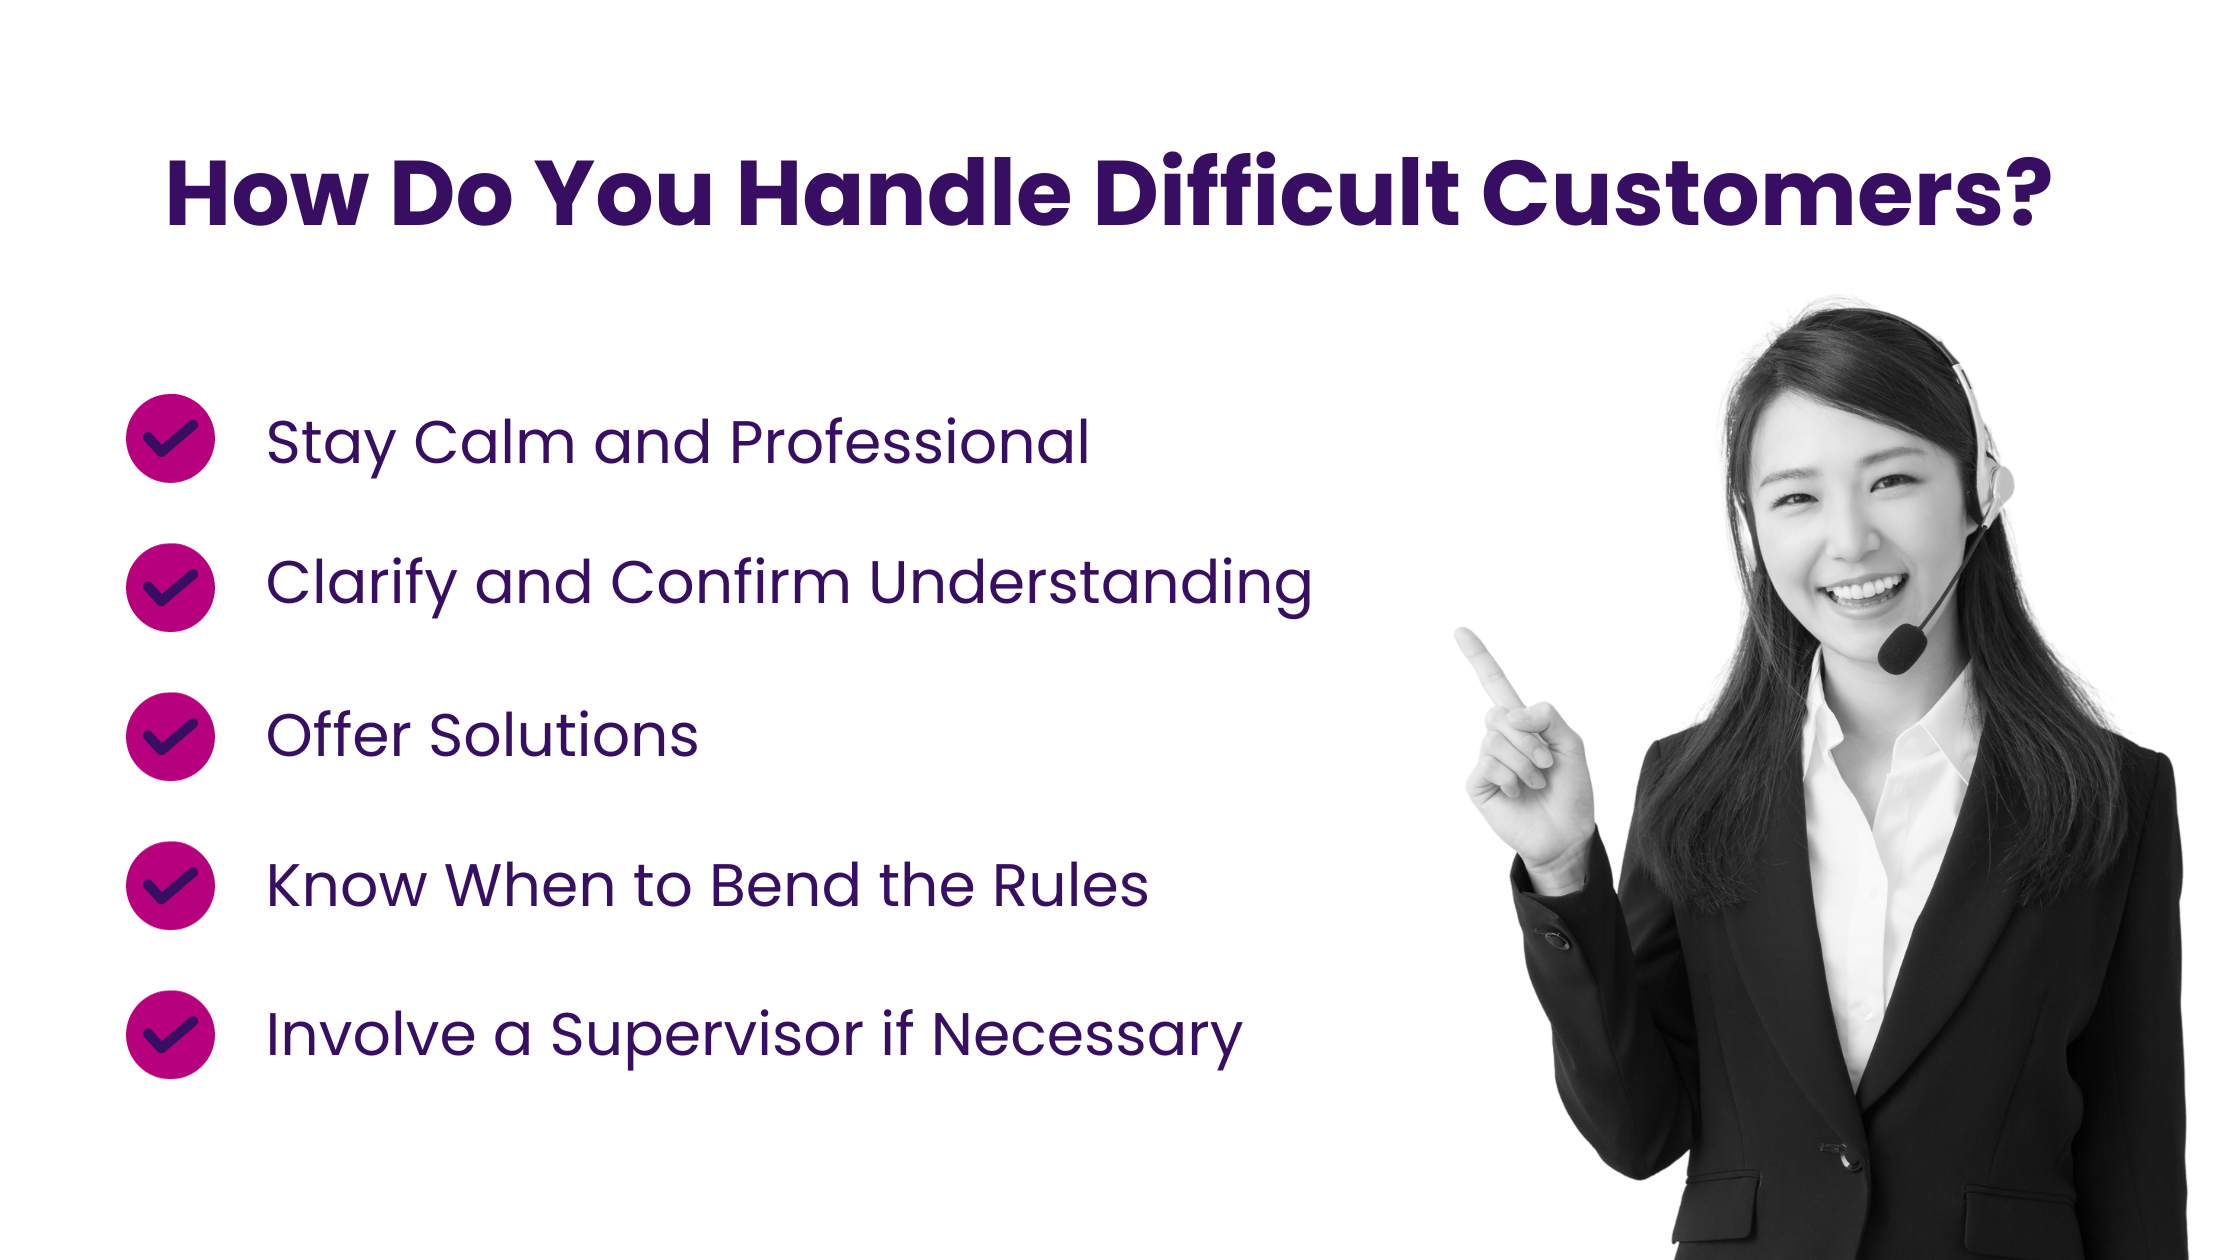 How Do You Handle Difficult Customers